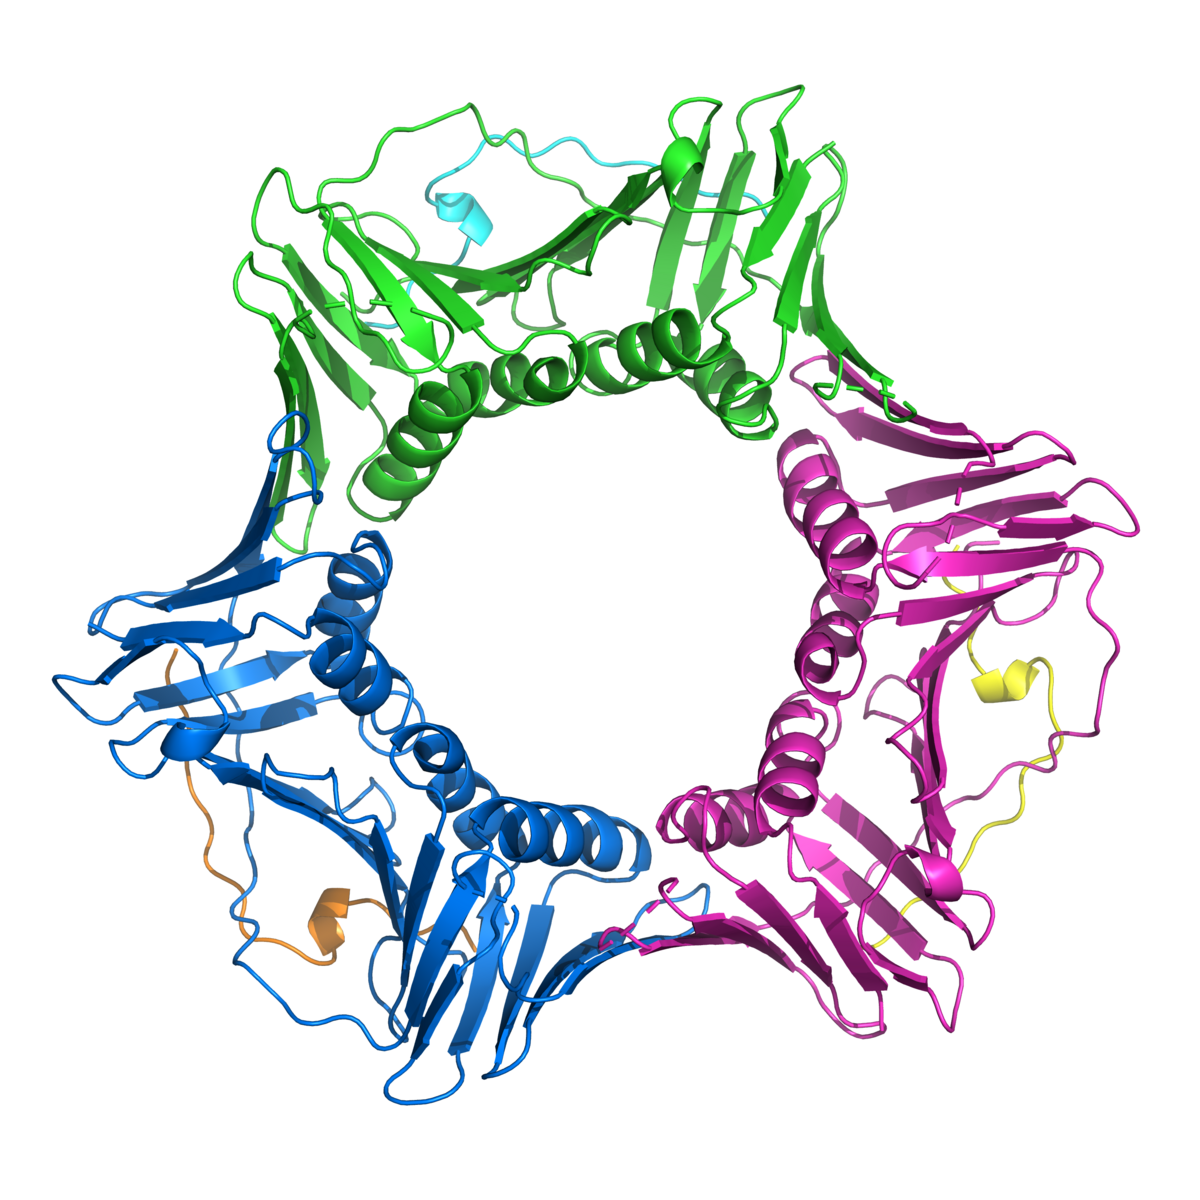 PCNA is a star-shaped protein which helps FAN1 repair DNA  